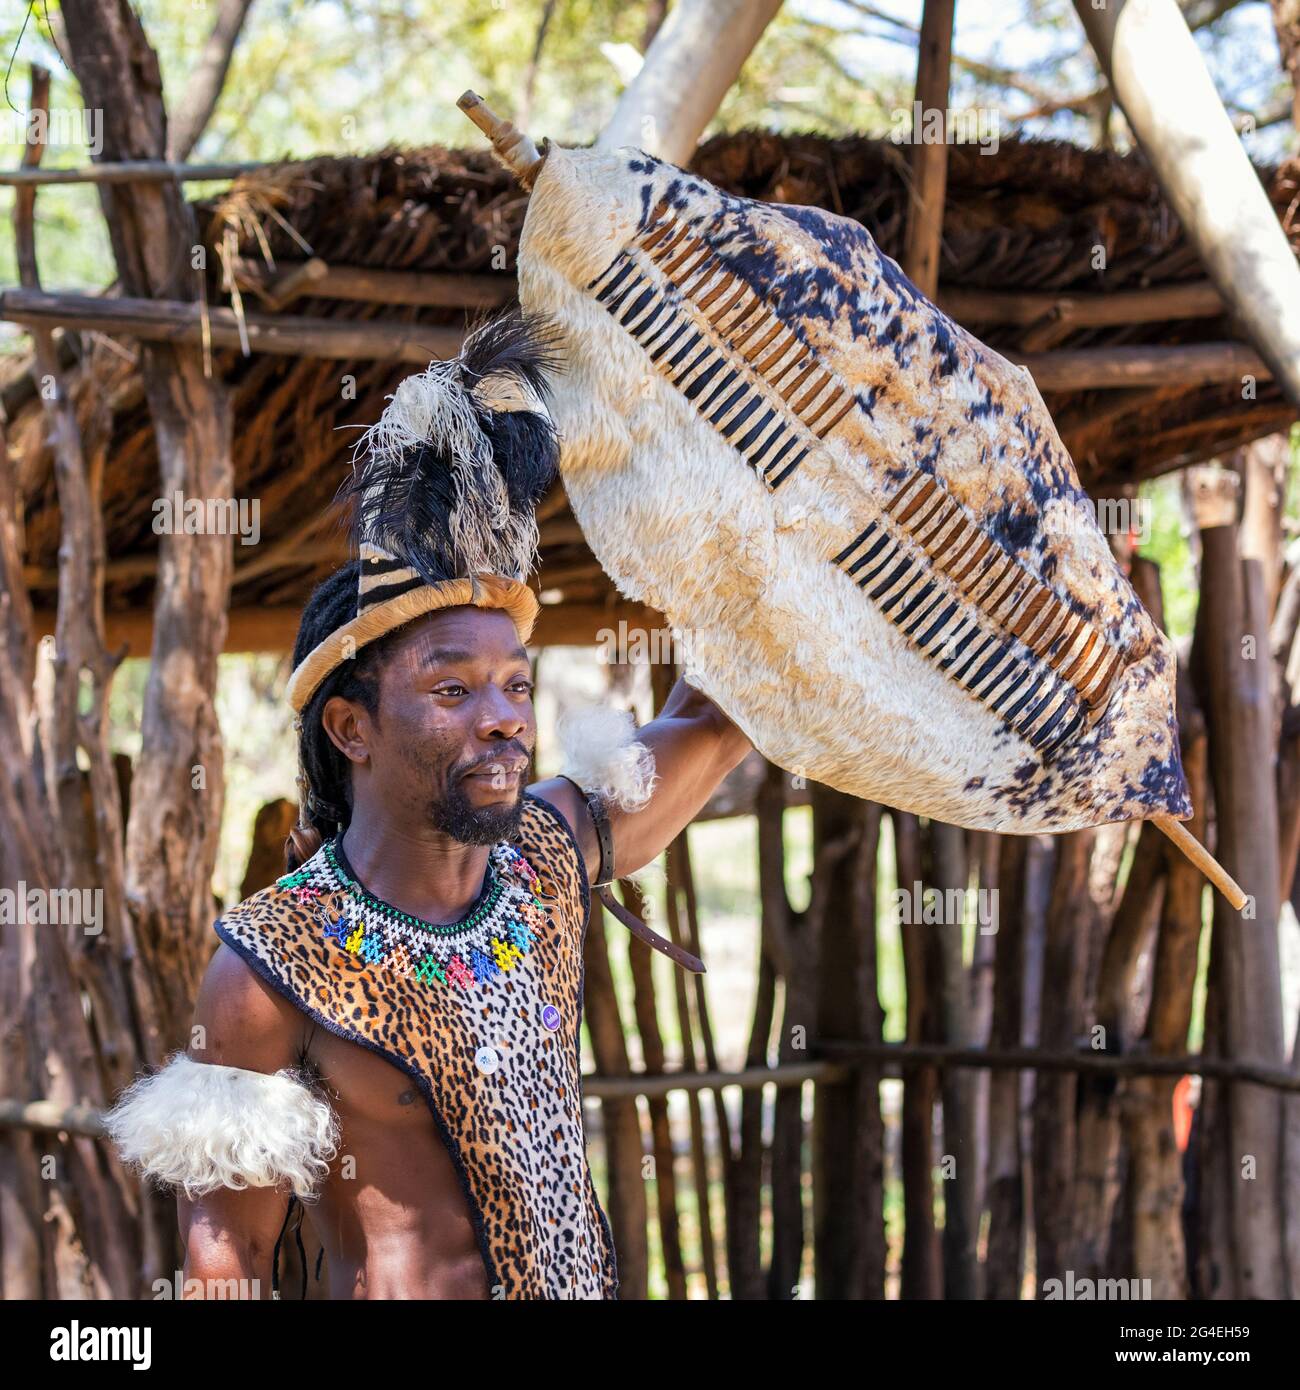 Lesedi Cultural Village, South Africa - 4th November 2106: Zulu warrior demonstration. Tribesman in Zulu costume of skins with beaded decoration, a fe Stock Photo